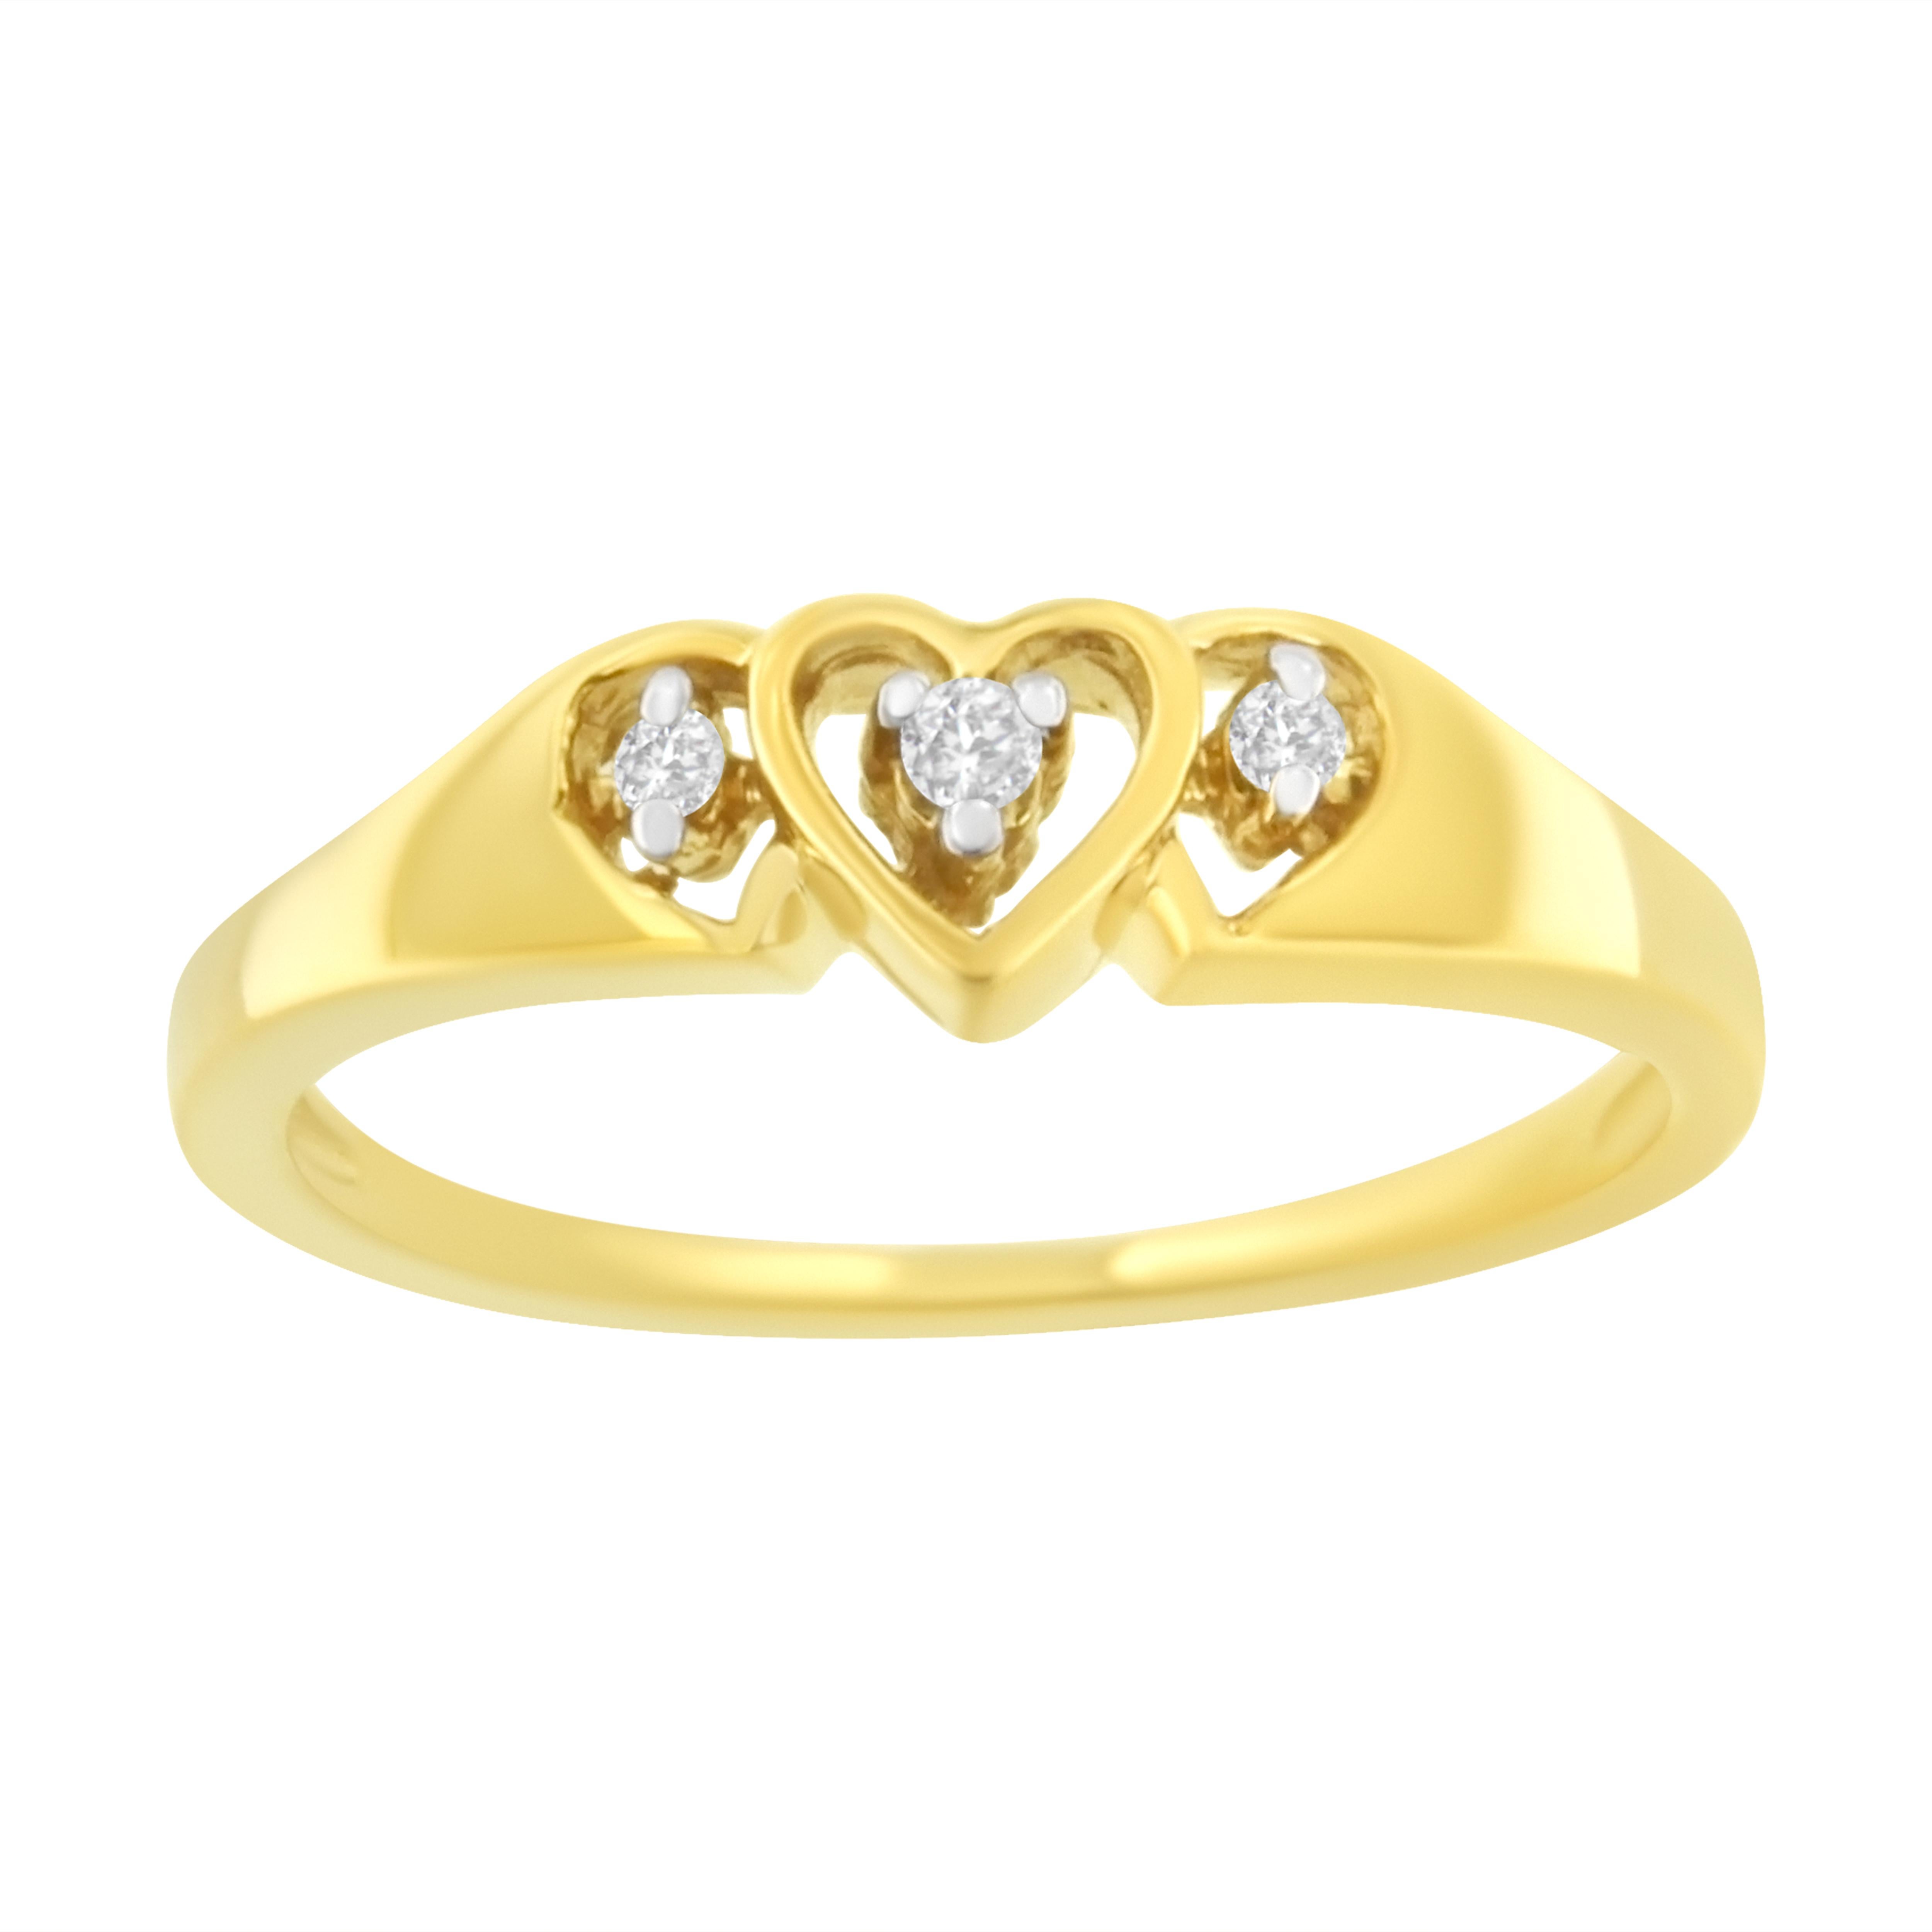 This fascinating Triple Heart Diamond Ring will speak volumes about your love. This shimmering ring sparkles with the fire of 3 splendid round cut diamonds, centrally staged in each heart. All the diamonds are perfectly prong set on luminous 10